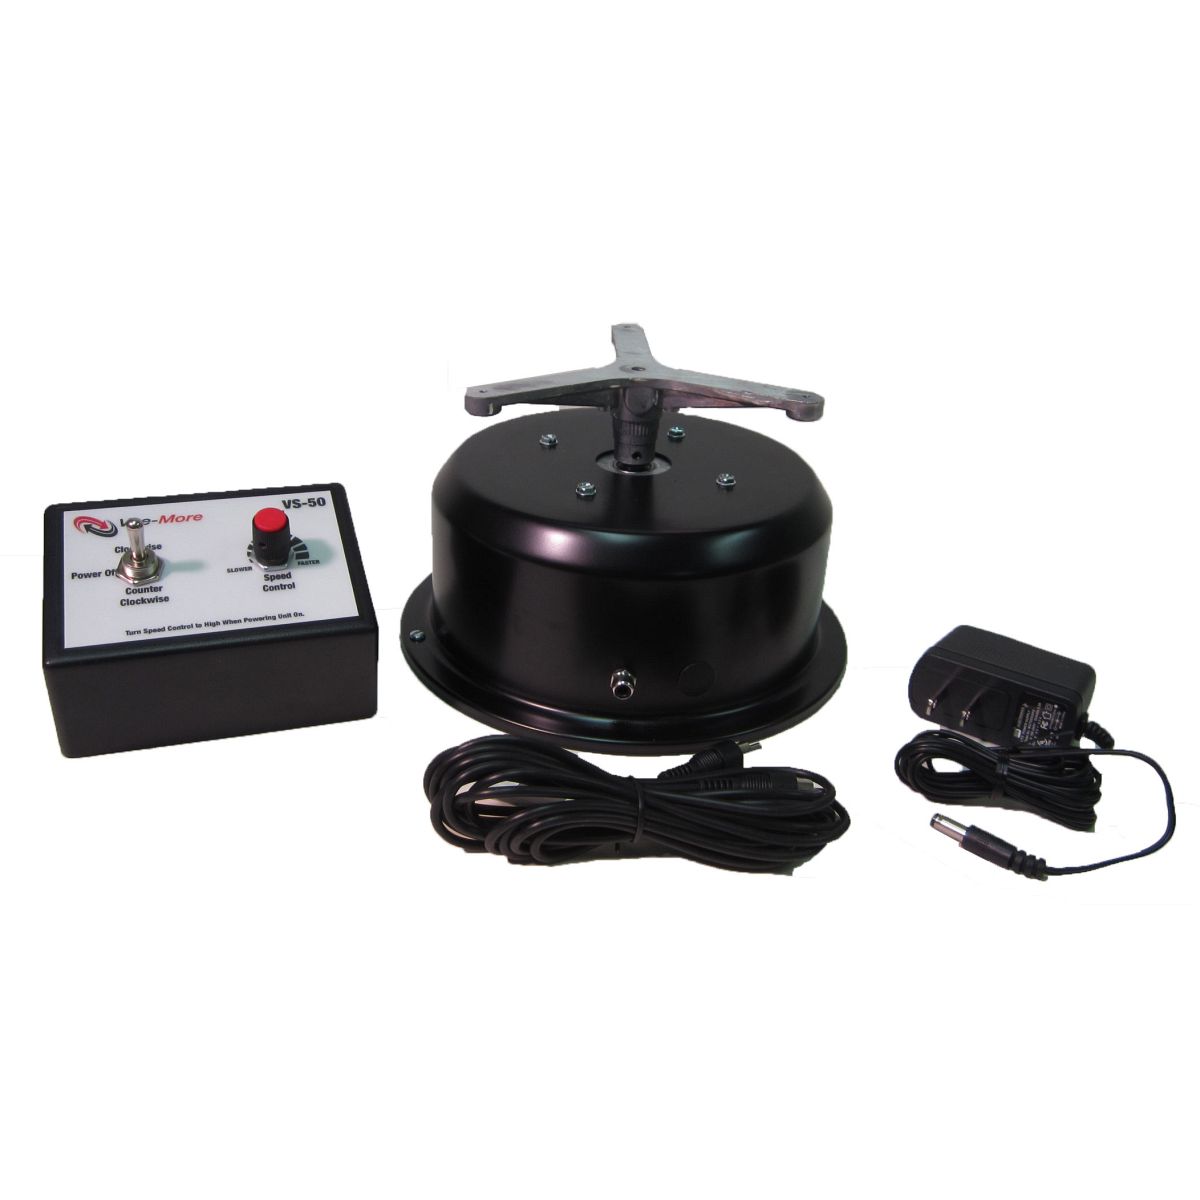 Display Turntable with Variable Speed for Trades Shows, Retail